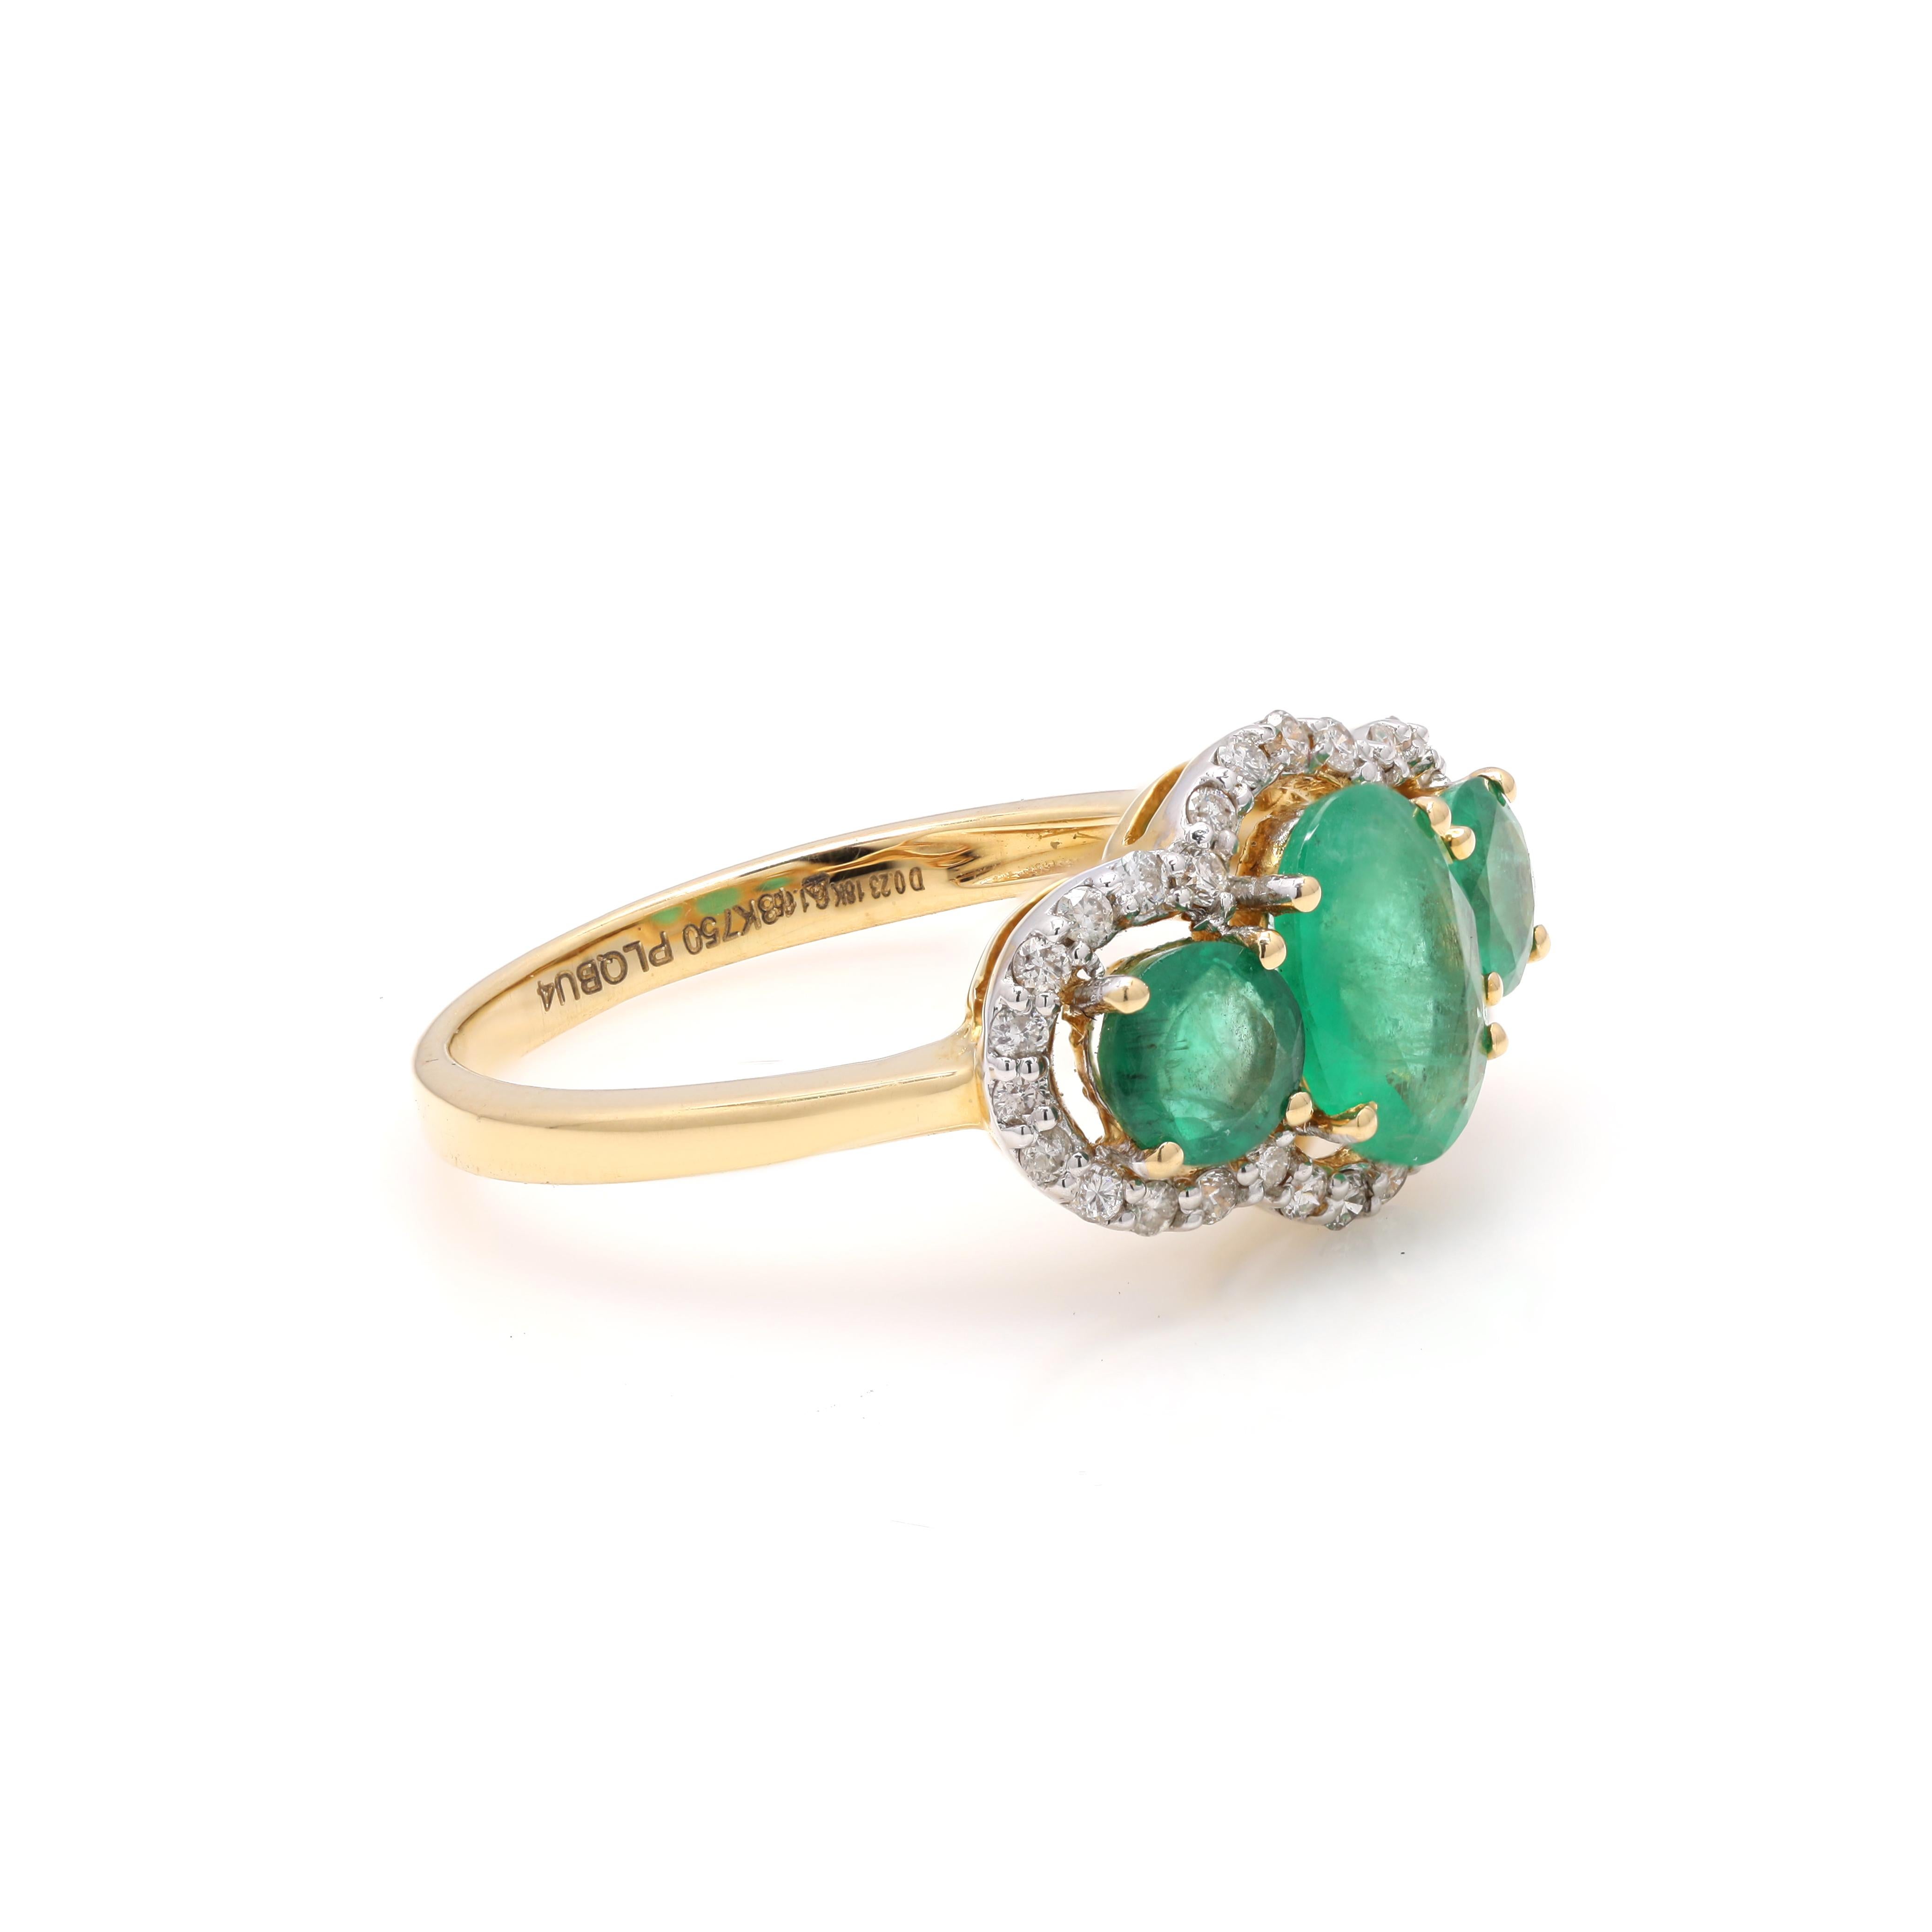 For Sale:  Natural 18k Yellow Gold Emerald Ring, Three Stone Emerald and Diamond Ring 2